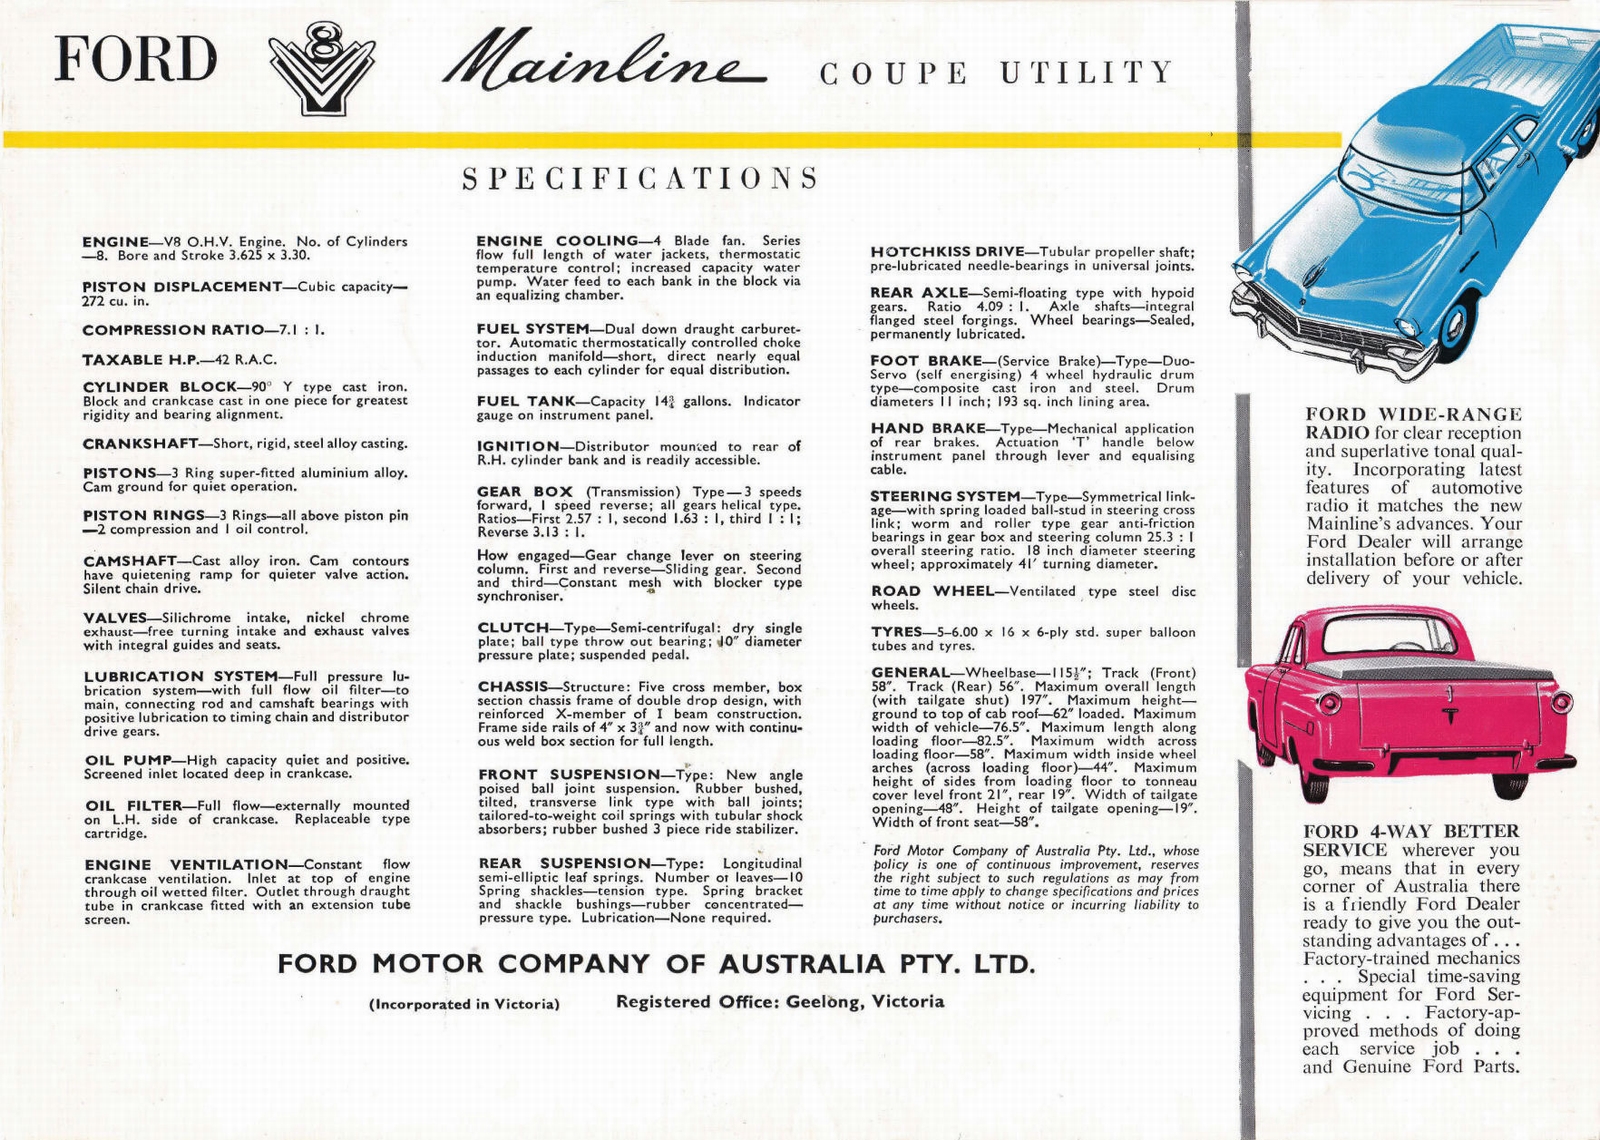 n_1956 Ford Malnline Coupe Utility (Aus)-10.jpg